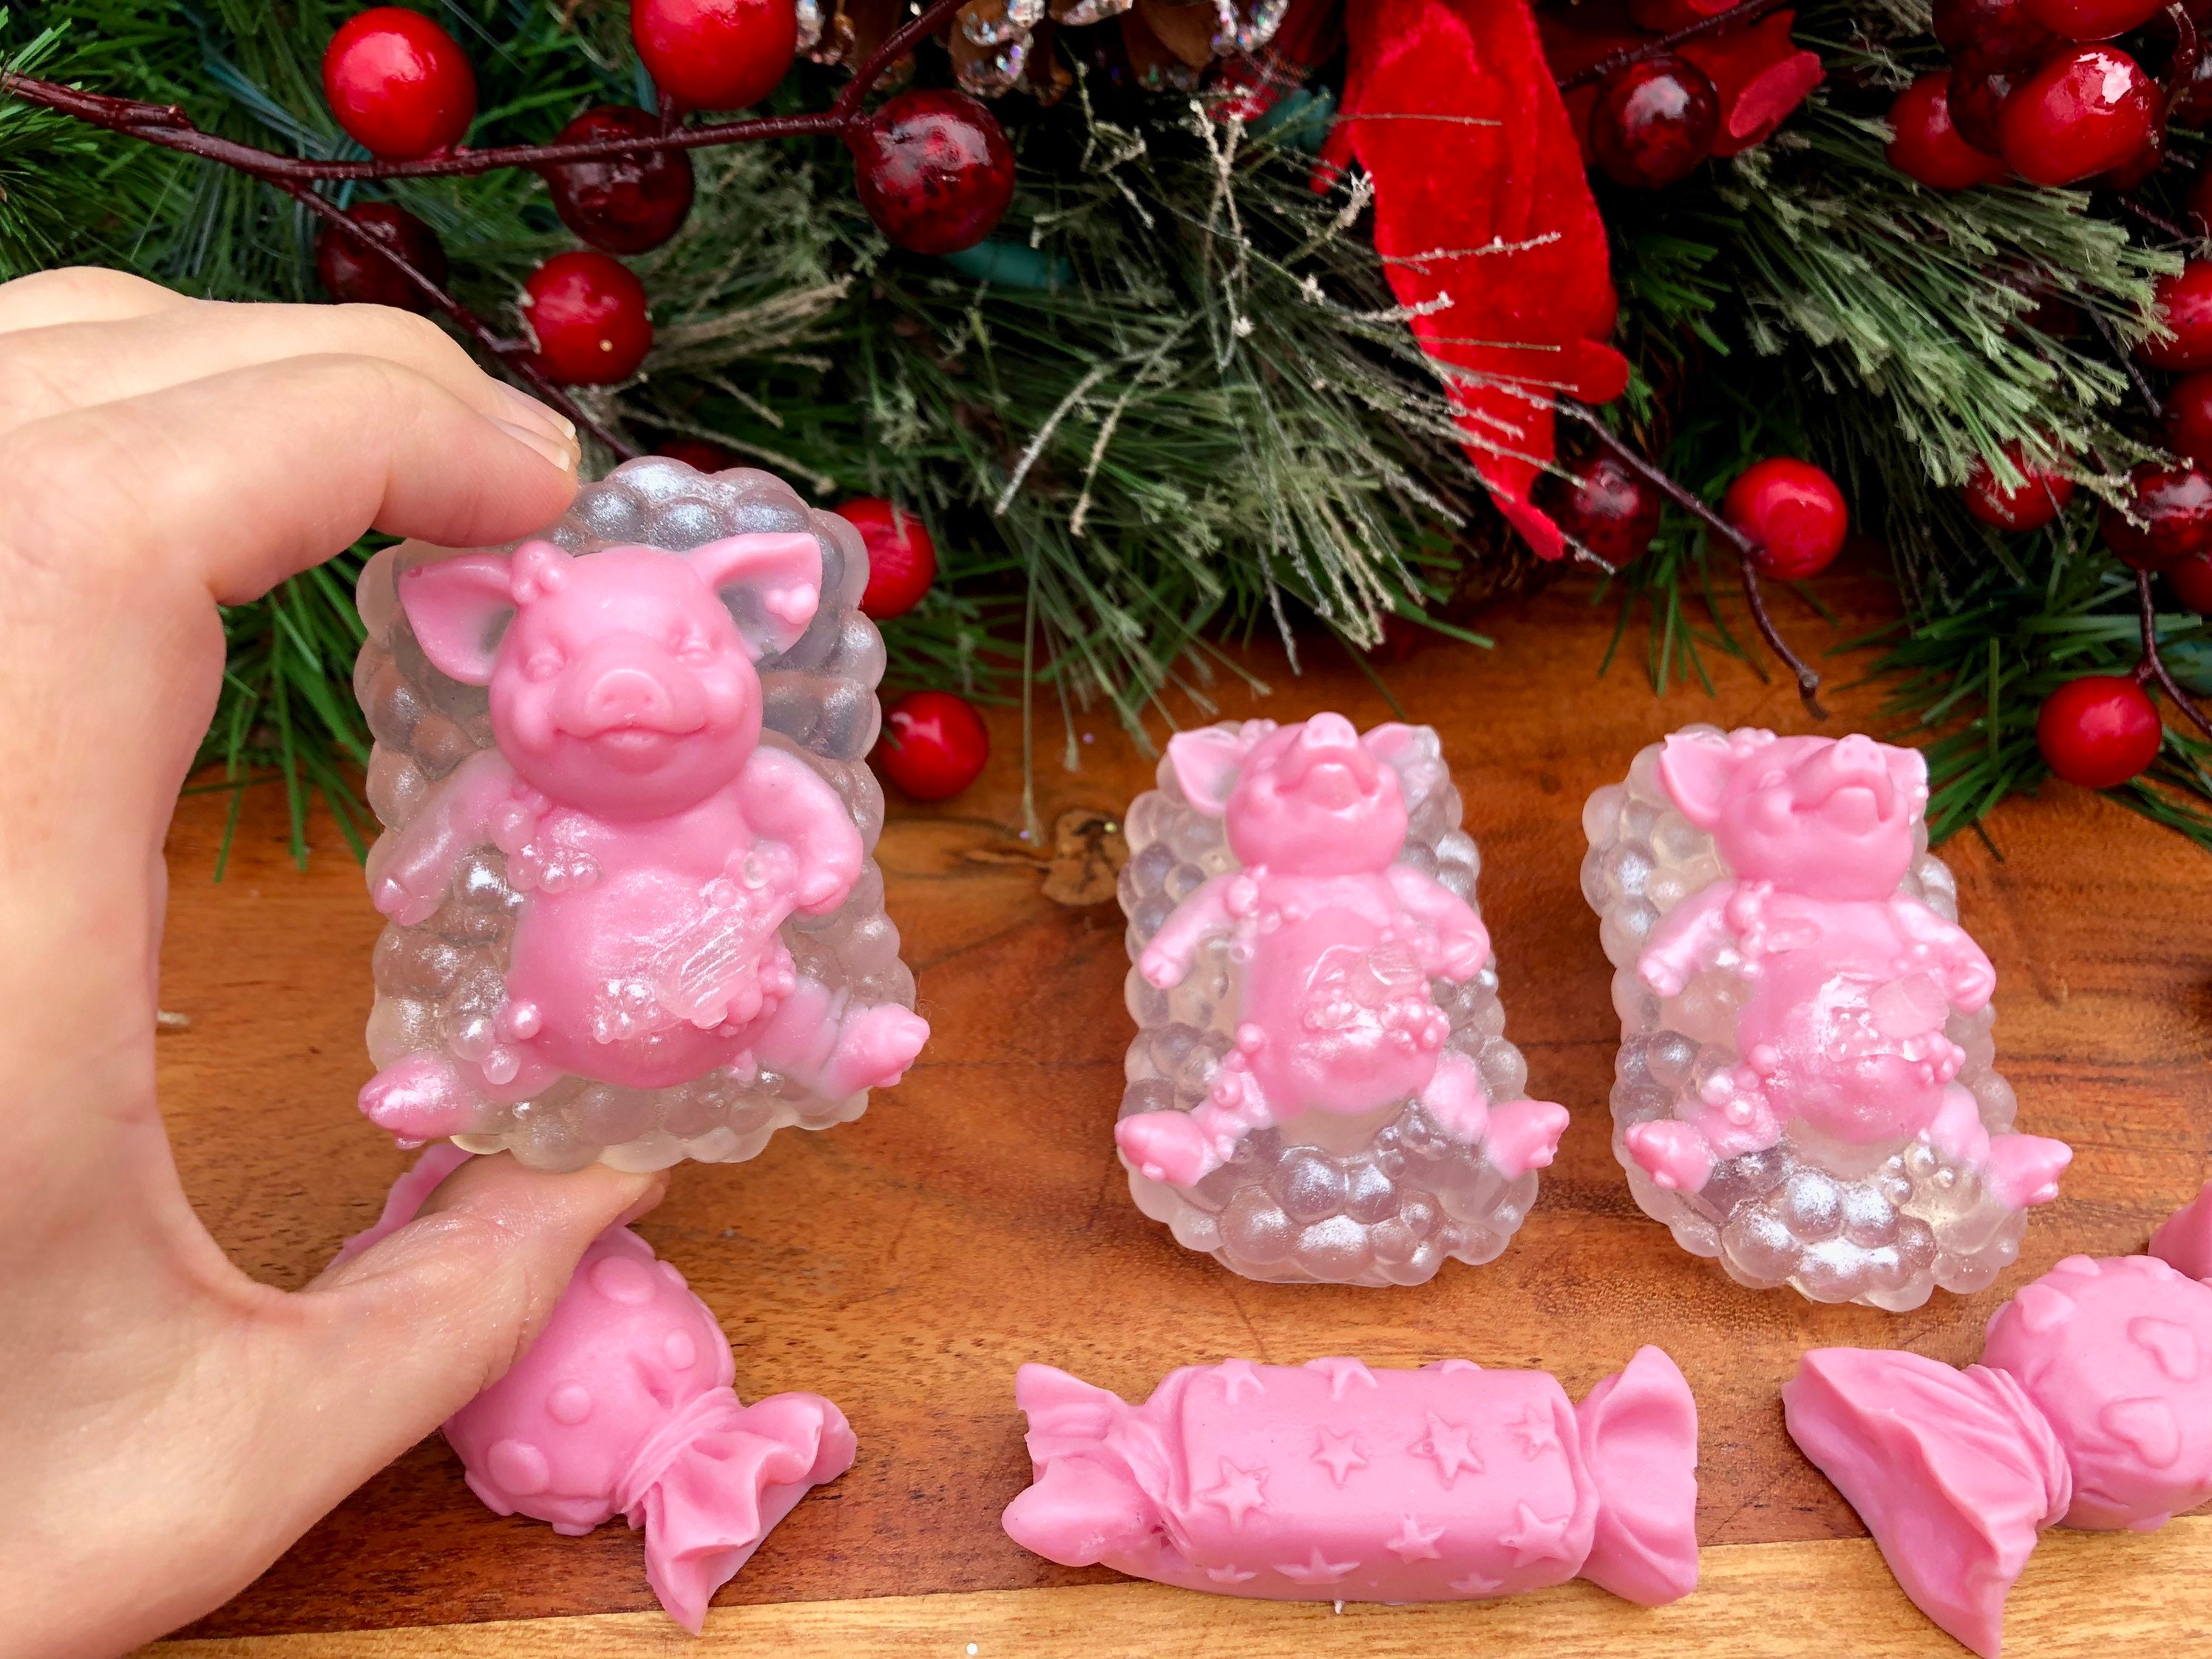 Kawaii Piggy Candle Mold Pig Candle Silicone Molds for Candle Making Candle  Craft Mold Soap Mold Resin Molds Baking Molds 